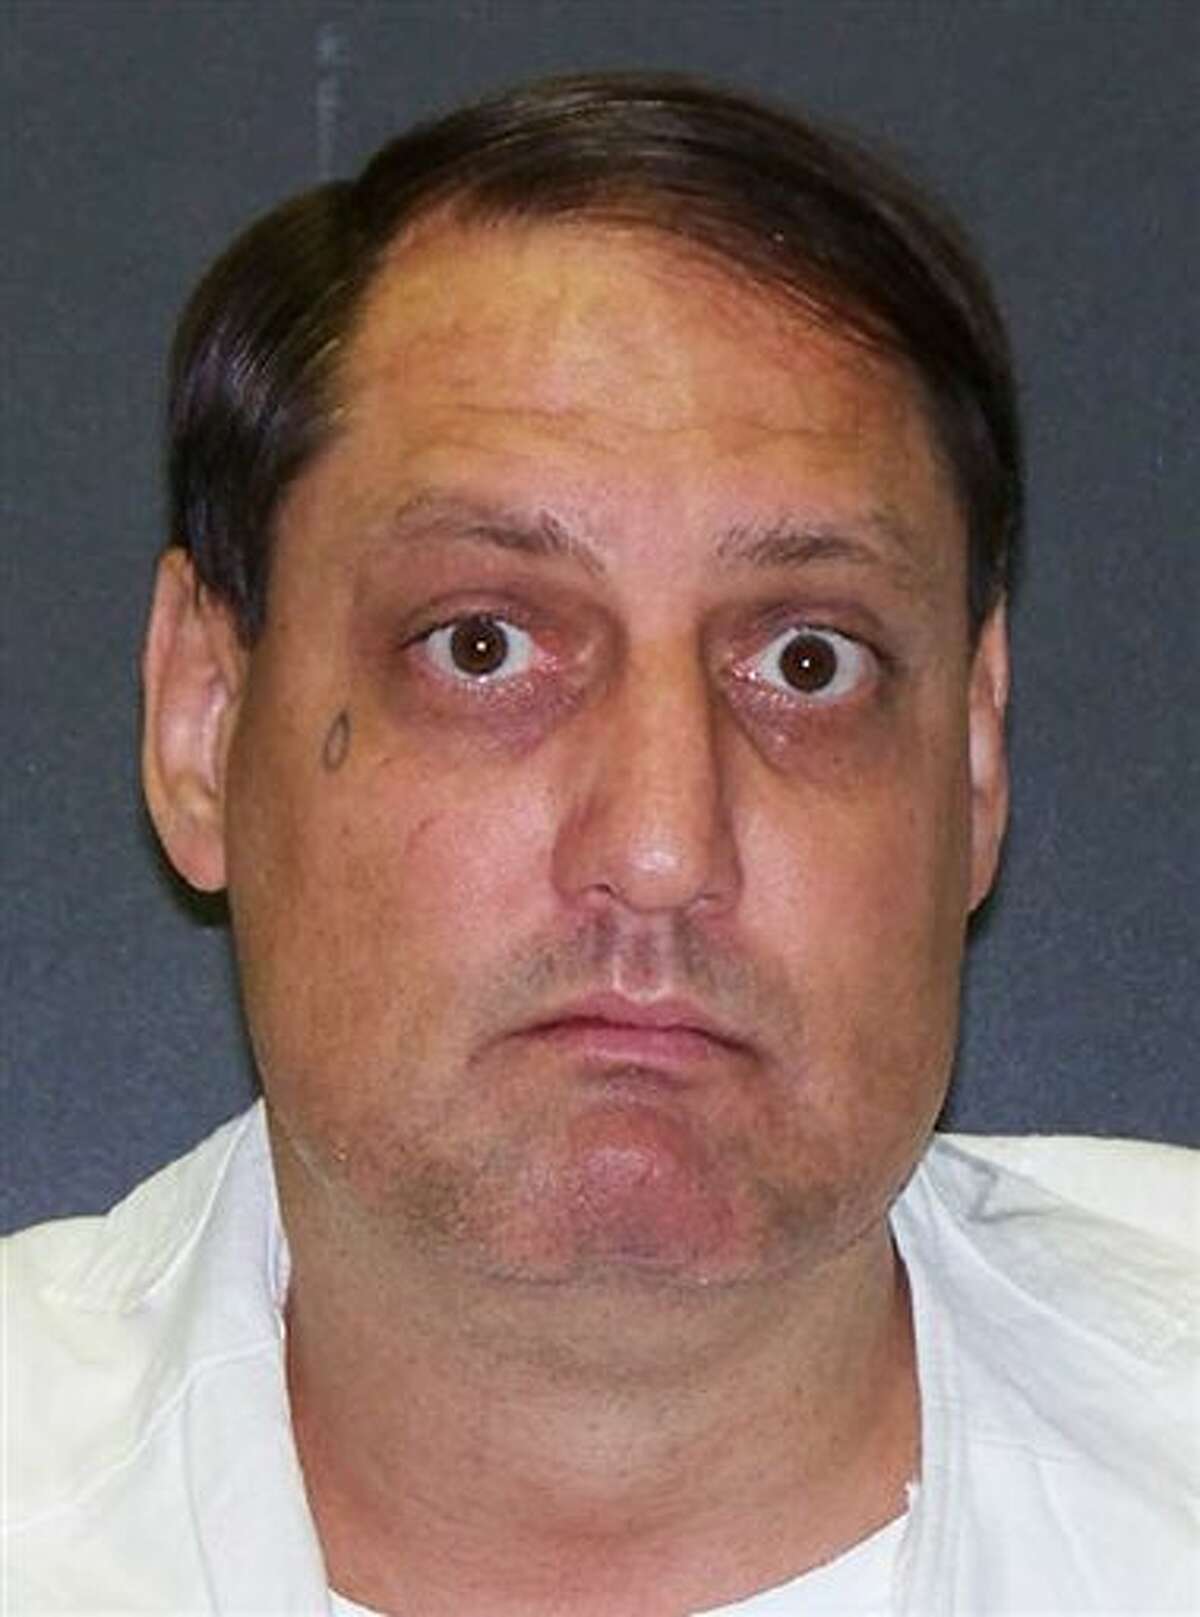 This photo provided by the Texas Department of Criminal Justice shows Jamie McCoskey. McCoskey,49, is scheduled to be executed Tuesday, Nov. 12, 2013 for abducting a Houston couple 22 years ago this week, killing a 21-year-old art student and raping the man’s pregnant fiancé. (AP Photo/Texas Department of Criminal Justice)